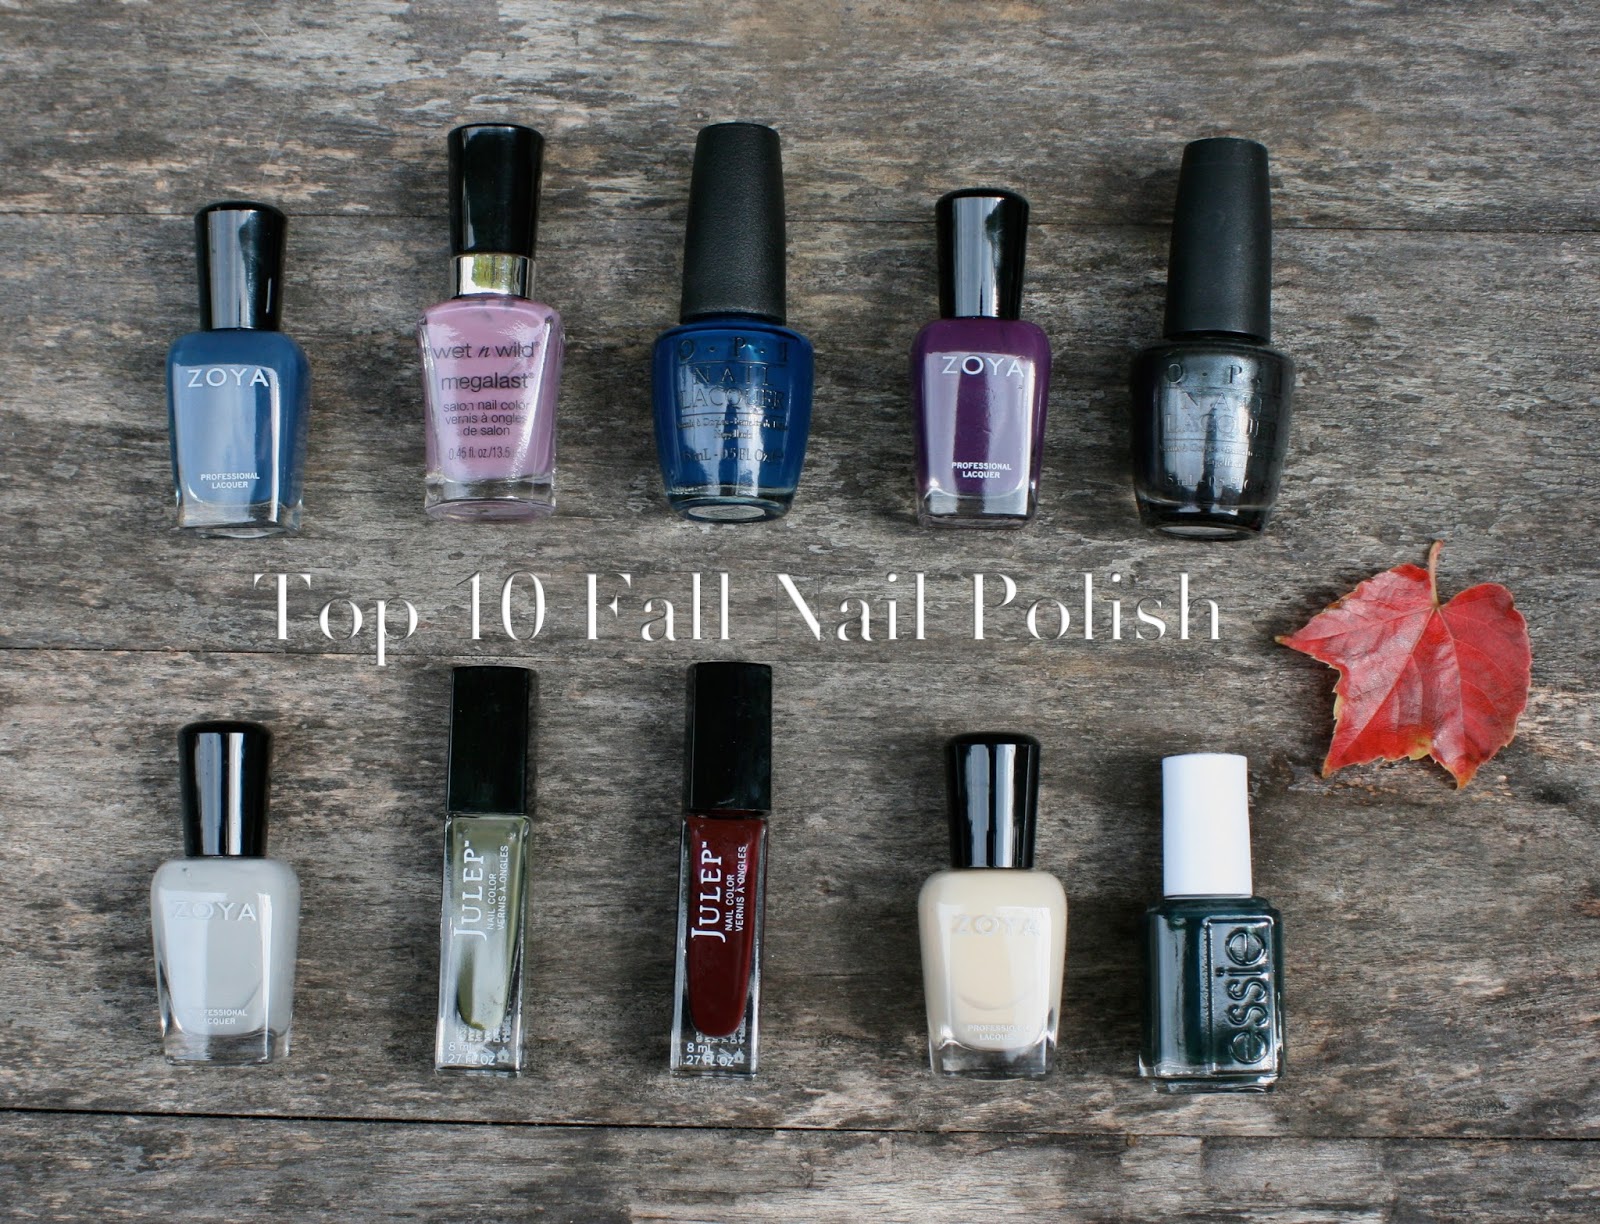 4. "Top 10 Nail Polish Colors for Toes: Expert Recommendations" - wide 3